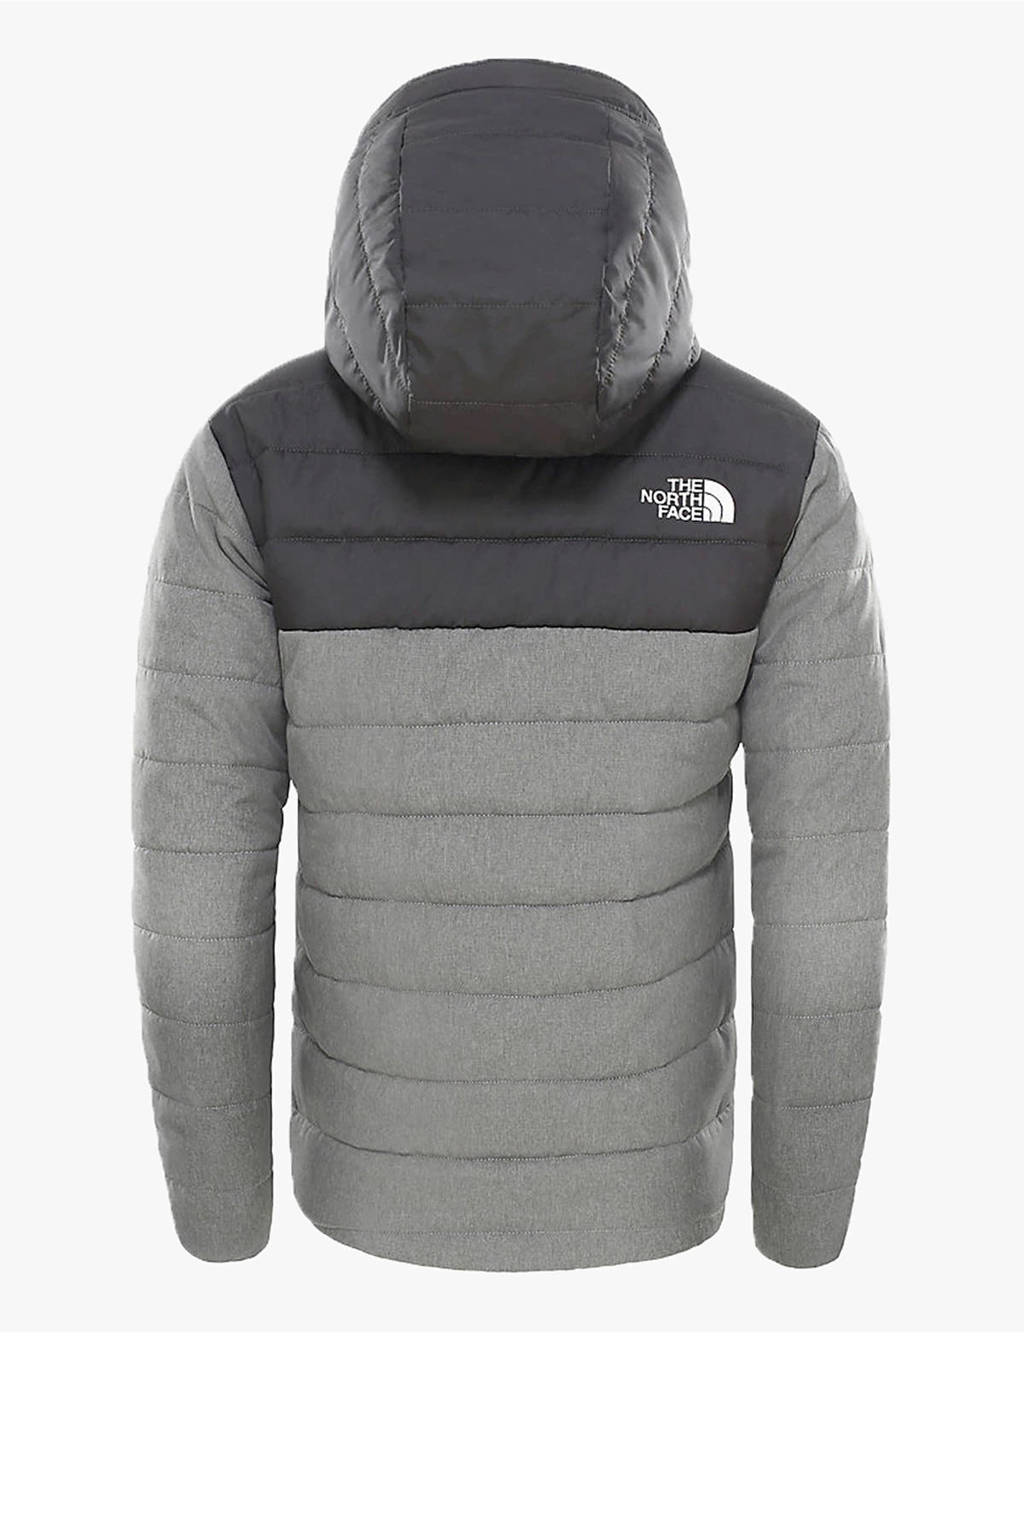 The North Face jas | wehkamp